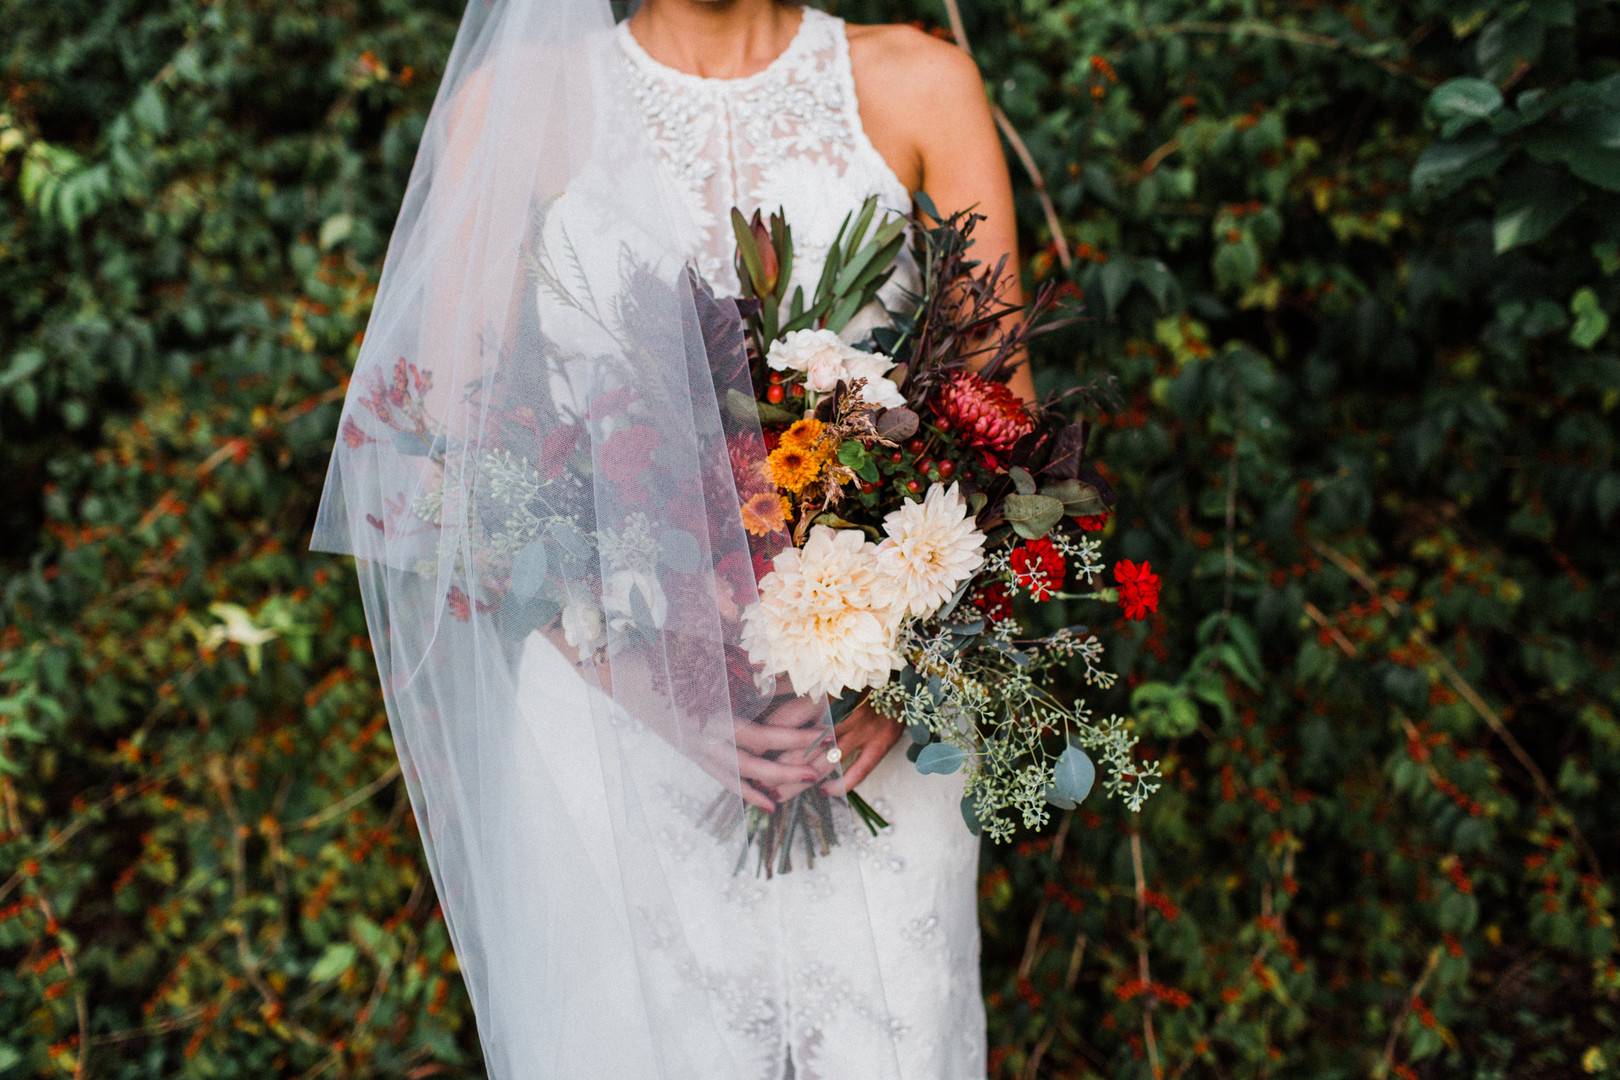 McCurdy_Bloom_LaurenBloomPhotography_MoodyDallasBridalsLaurenBloomPhotography26of37_big.jpg